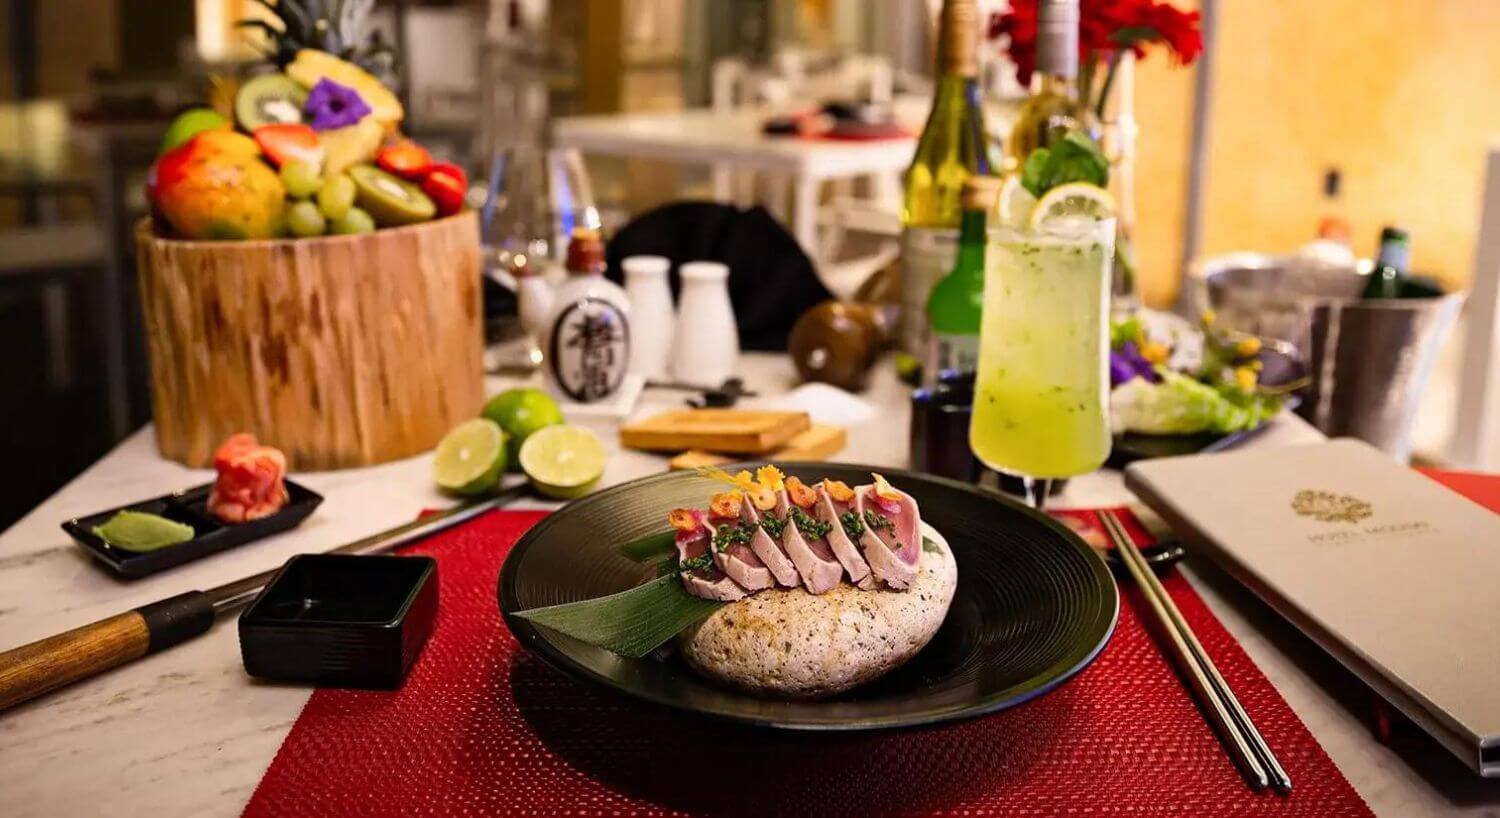 a black plate with a piece of bread and green leaf topped with seared ahi tuna, garnished with caviar and herbs, along with a green mojito cocktail, chopsticks, a menu, and a wood bowl full of fruit.